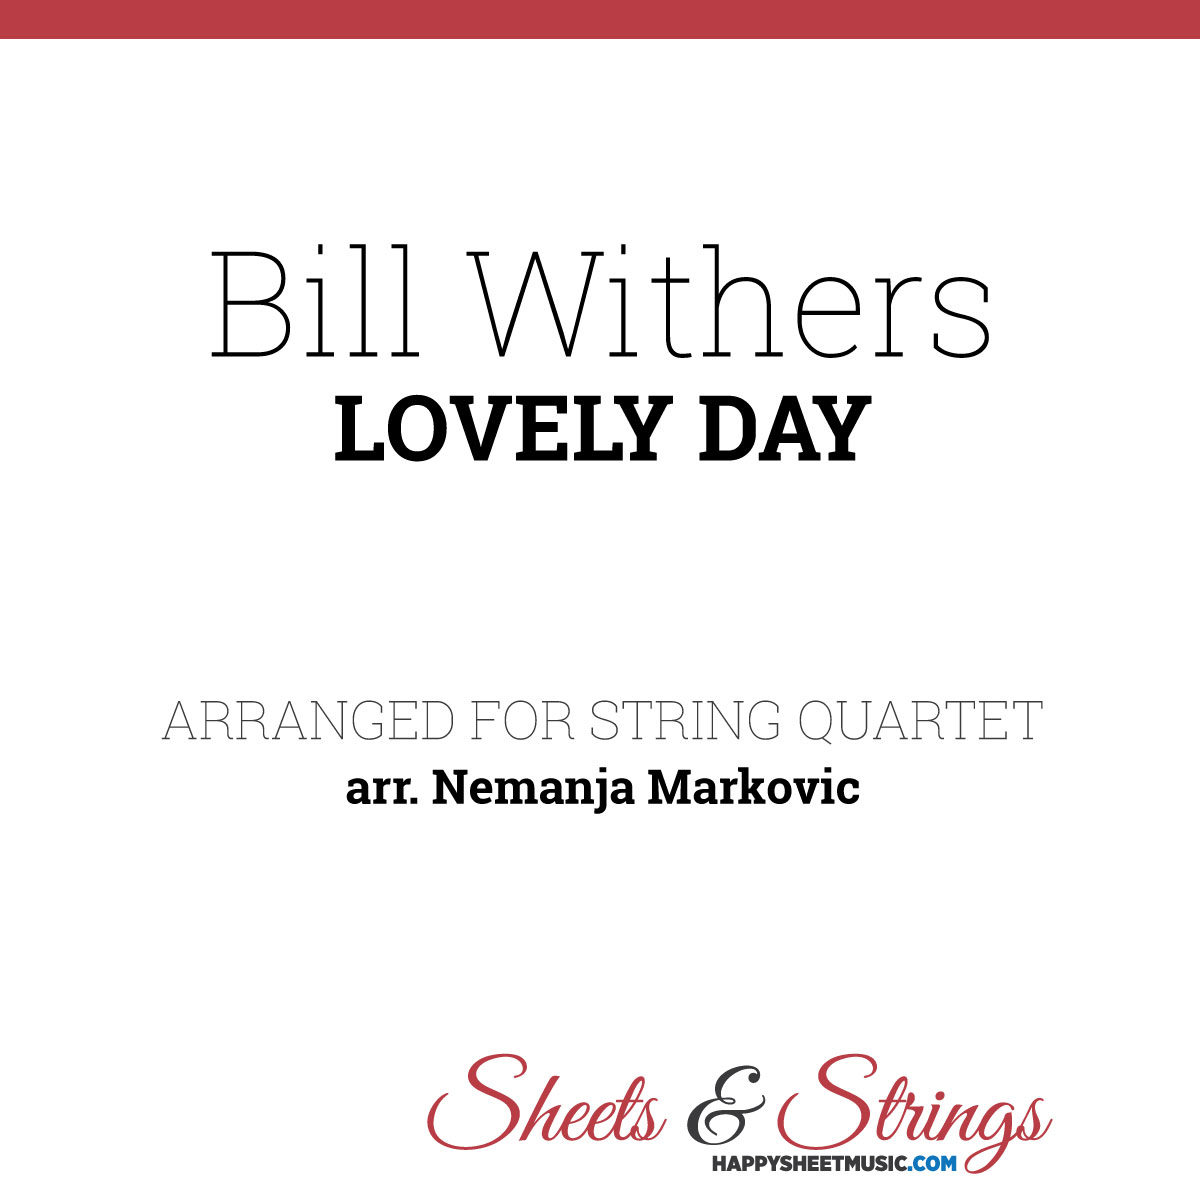 Bill Withers - Lovely Day- Sheet Music for String Quartet - Music Arrangement for String Quartet